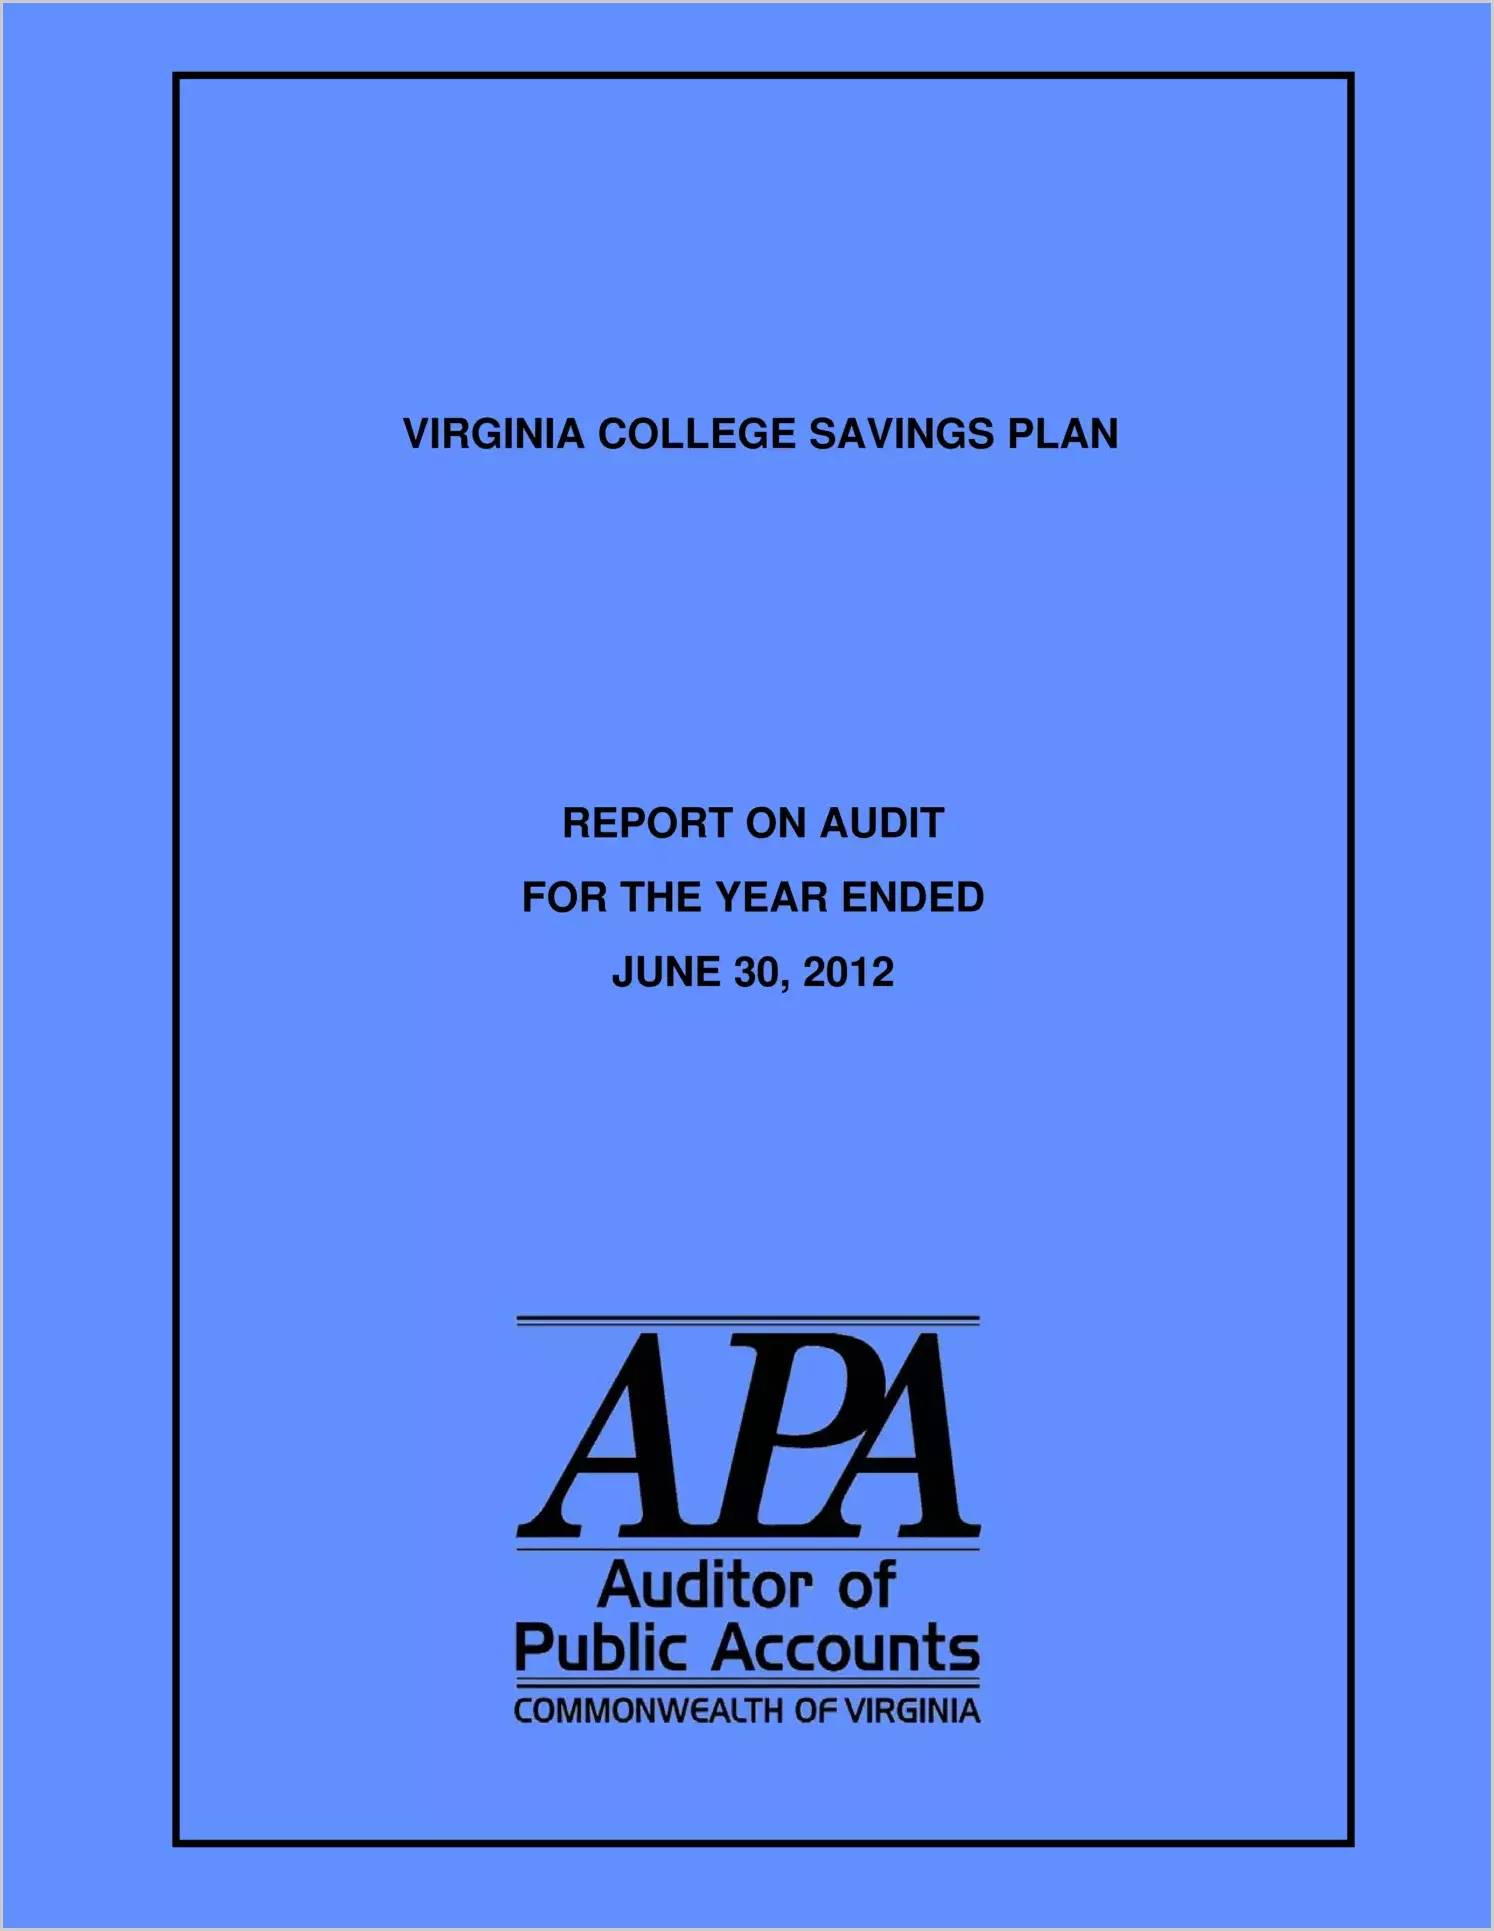 Virginia College Savings Plan for the year ended June 30, 2012